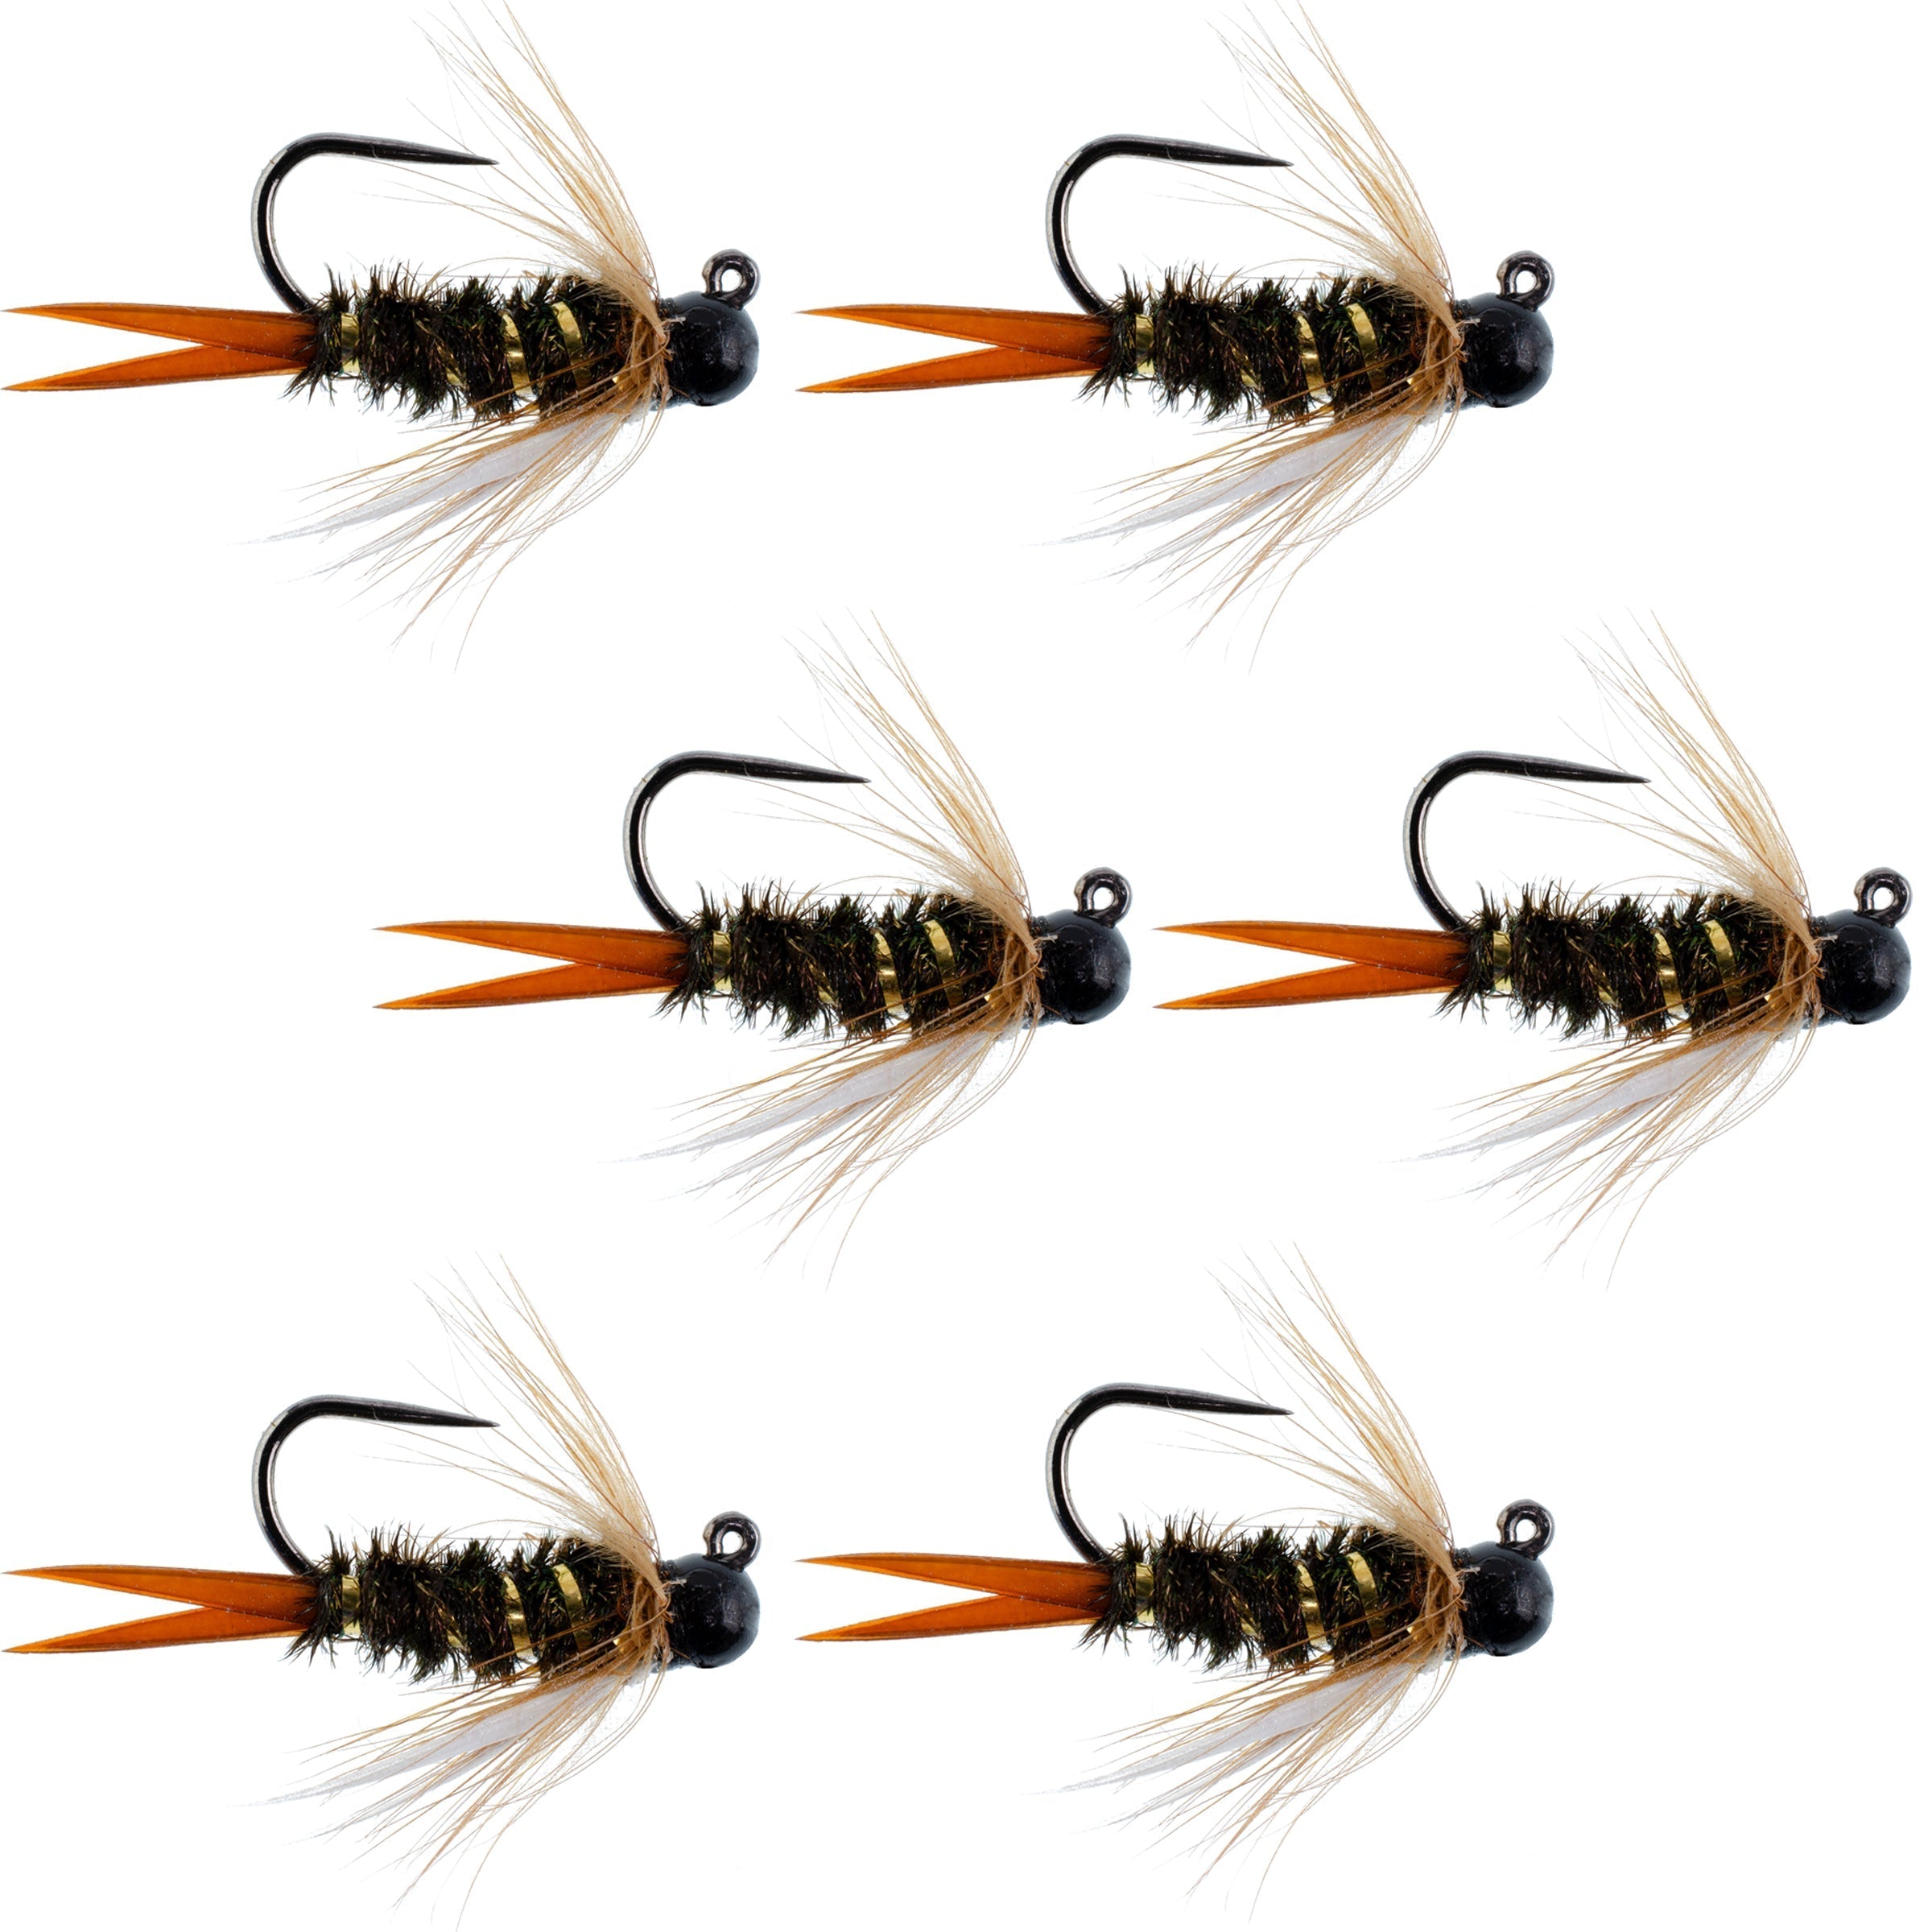 Black Tungsten Bead Prince Jig Tactical Czech Nymph Euro Nymphing Fly